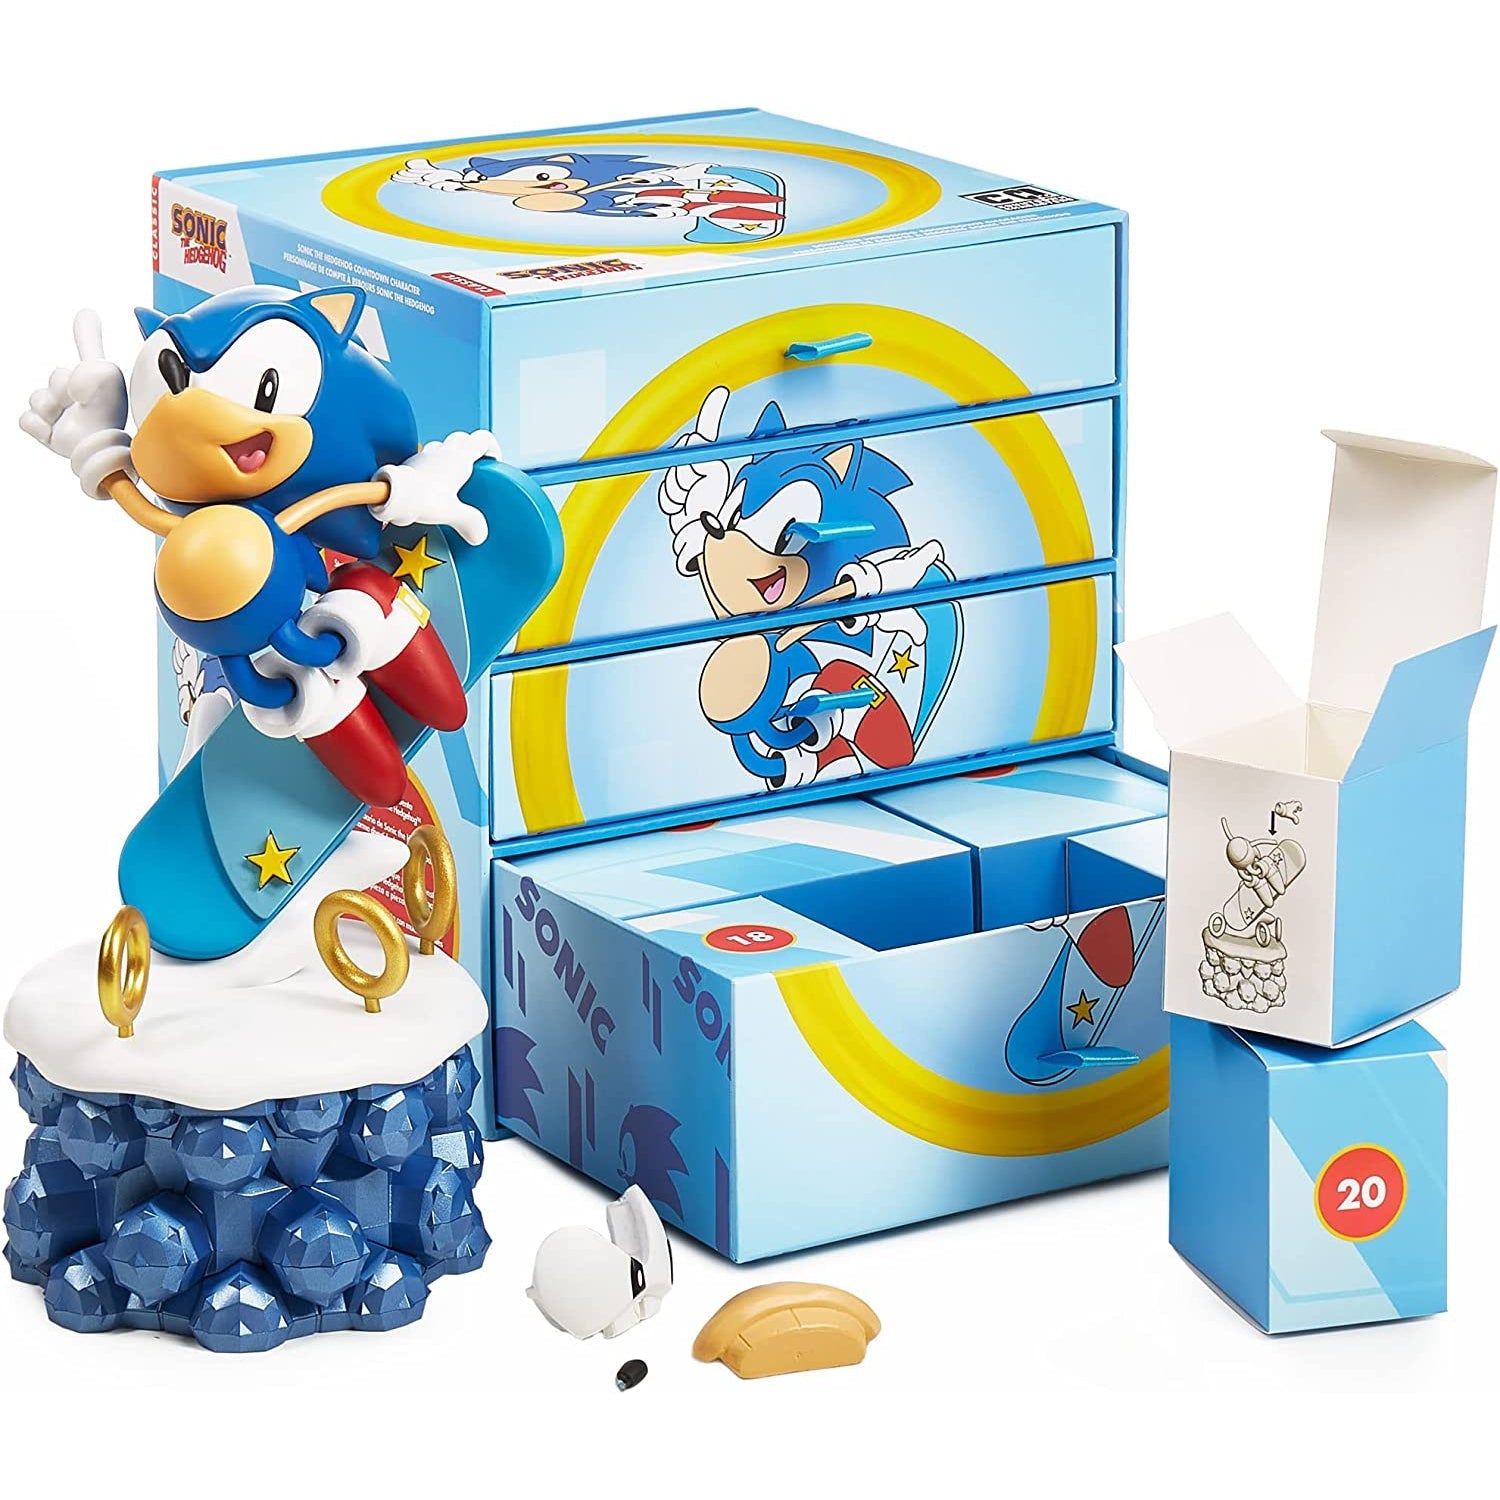 Numskull Sonic the Hedgehog Countdown Character Box - New